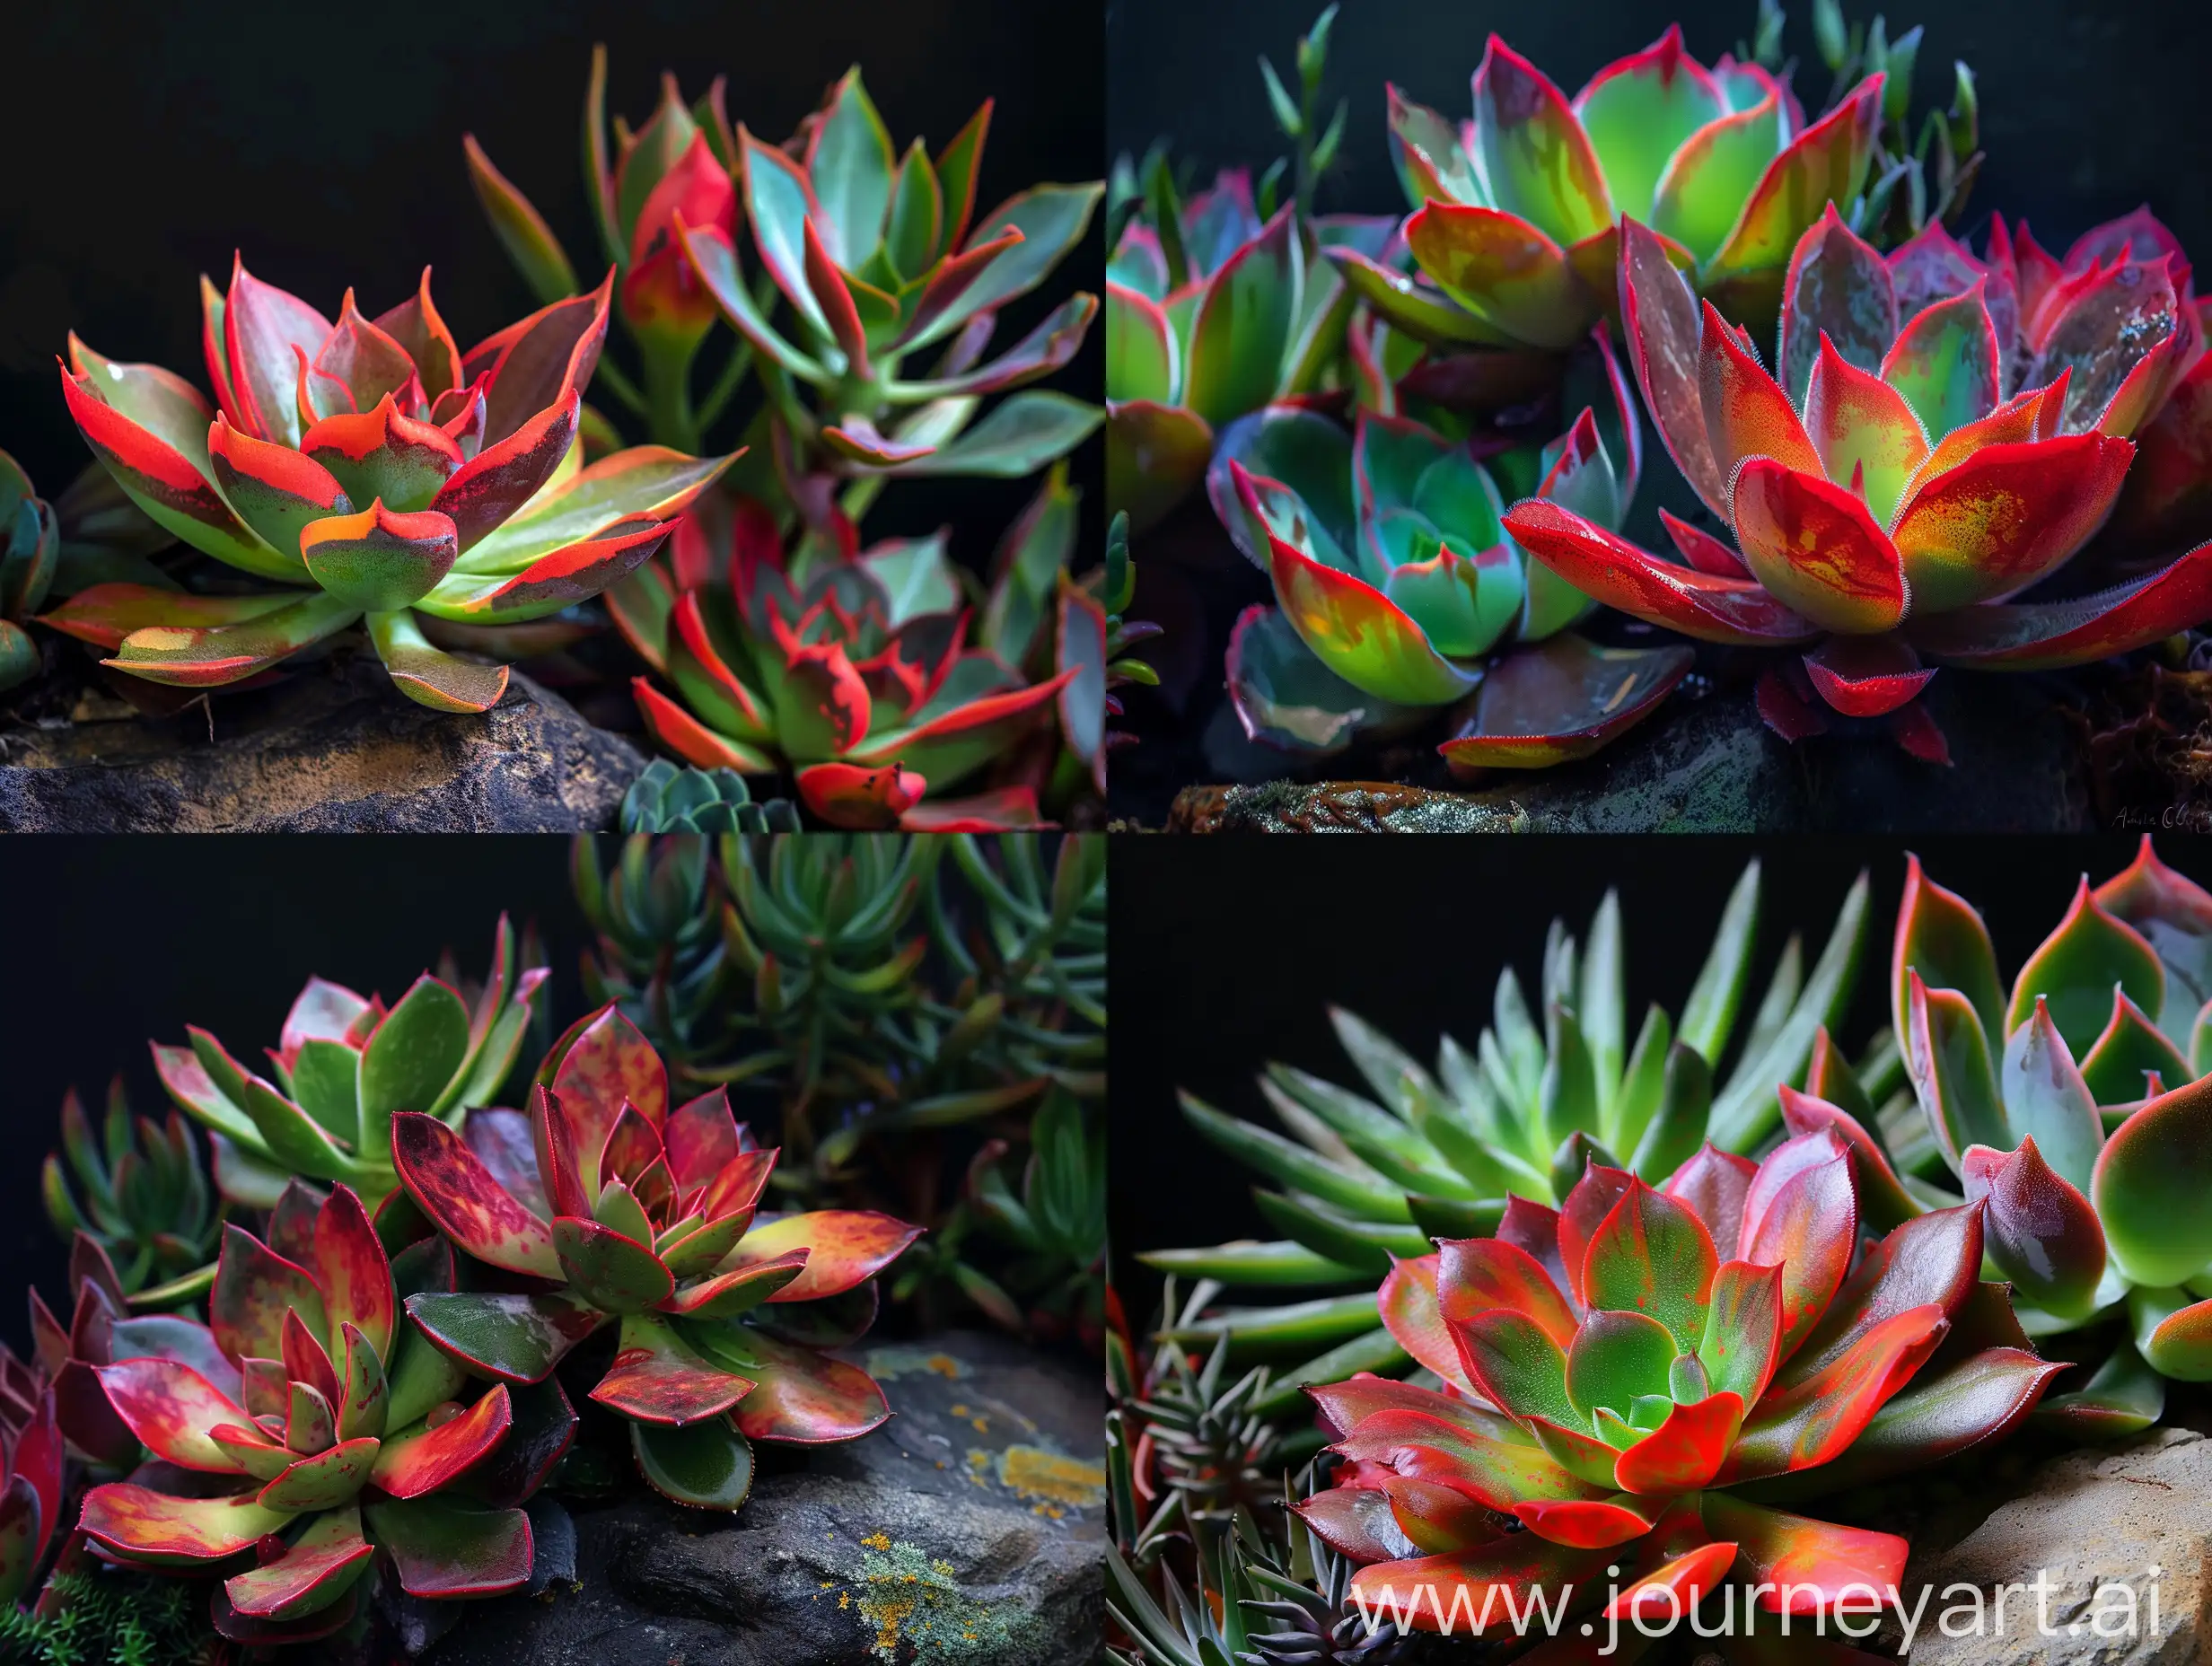 Vibrant-Red-and-Green-Succulent-Plant-Closeup-on-Dark-Background